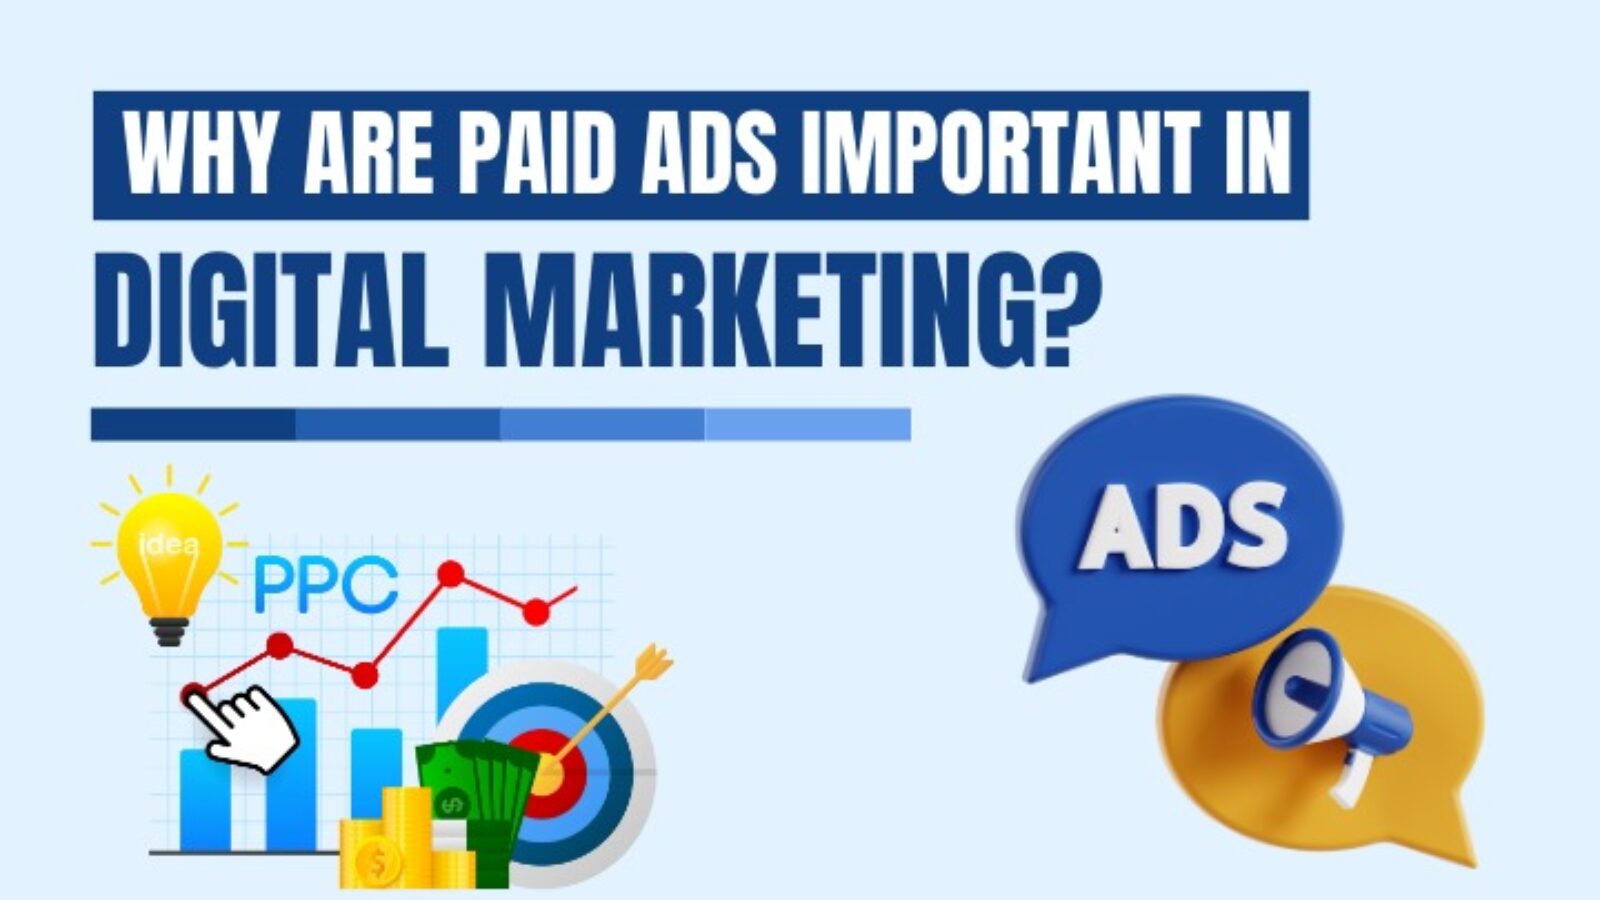 Why paid ads are important in digital marketing